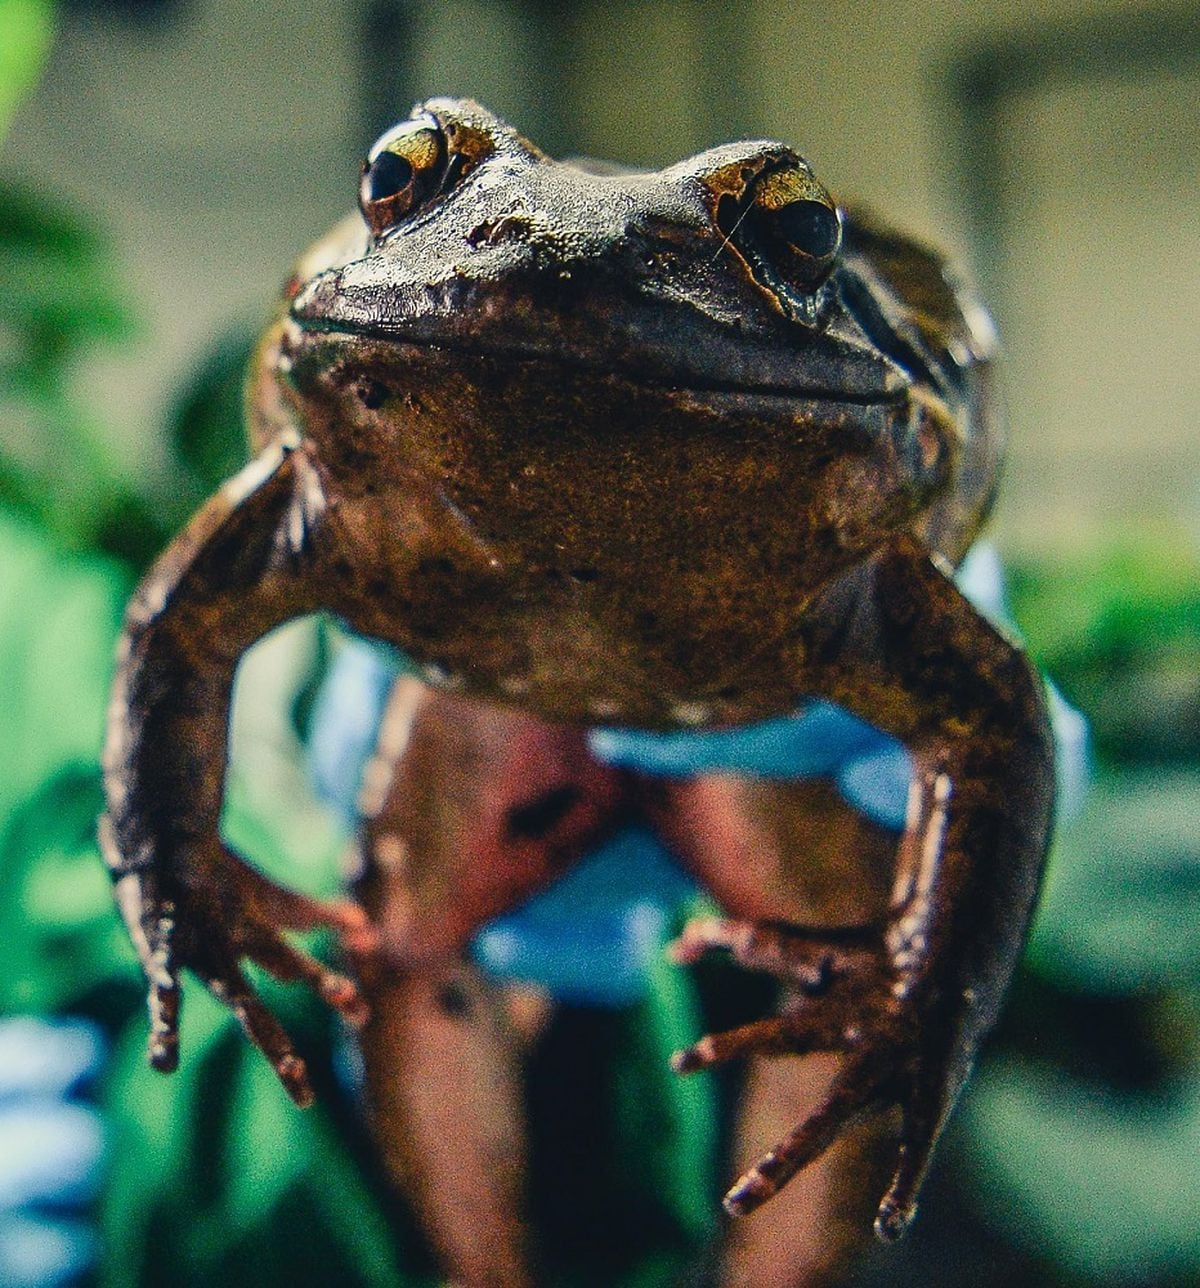 Frozen biosamples have been stored from the mountain chicken frogs to protect them against extinction